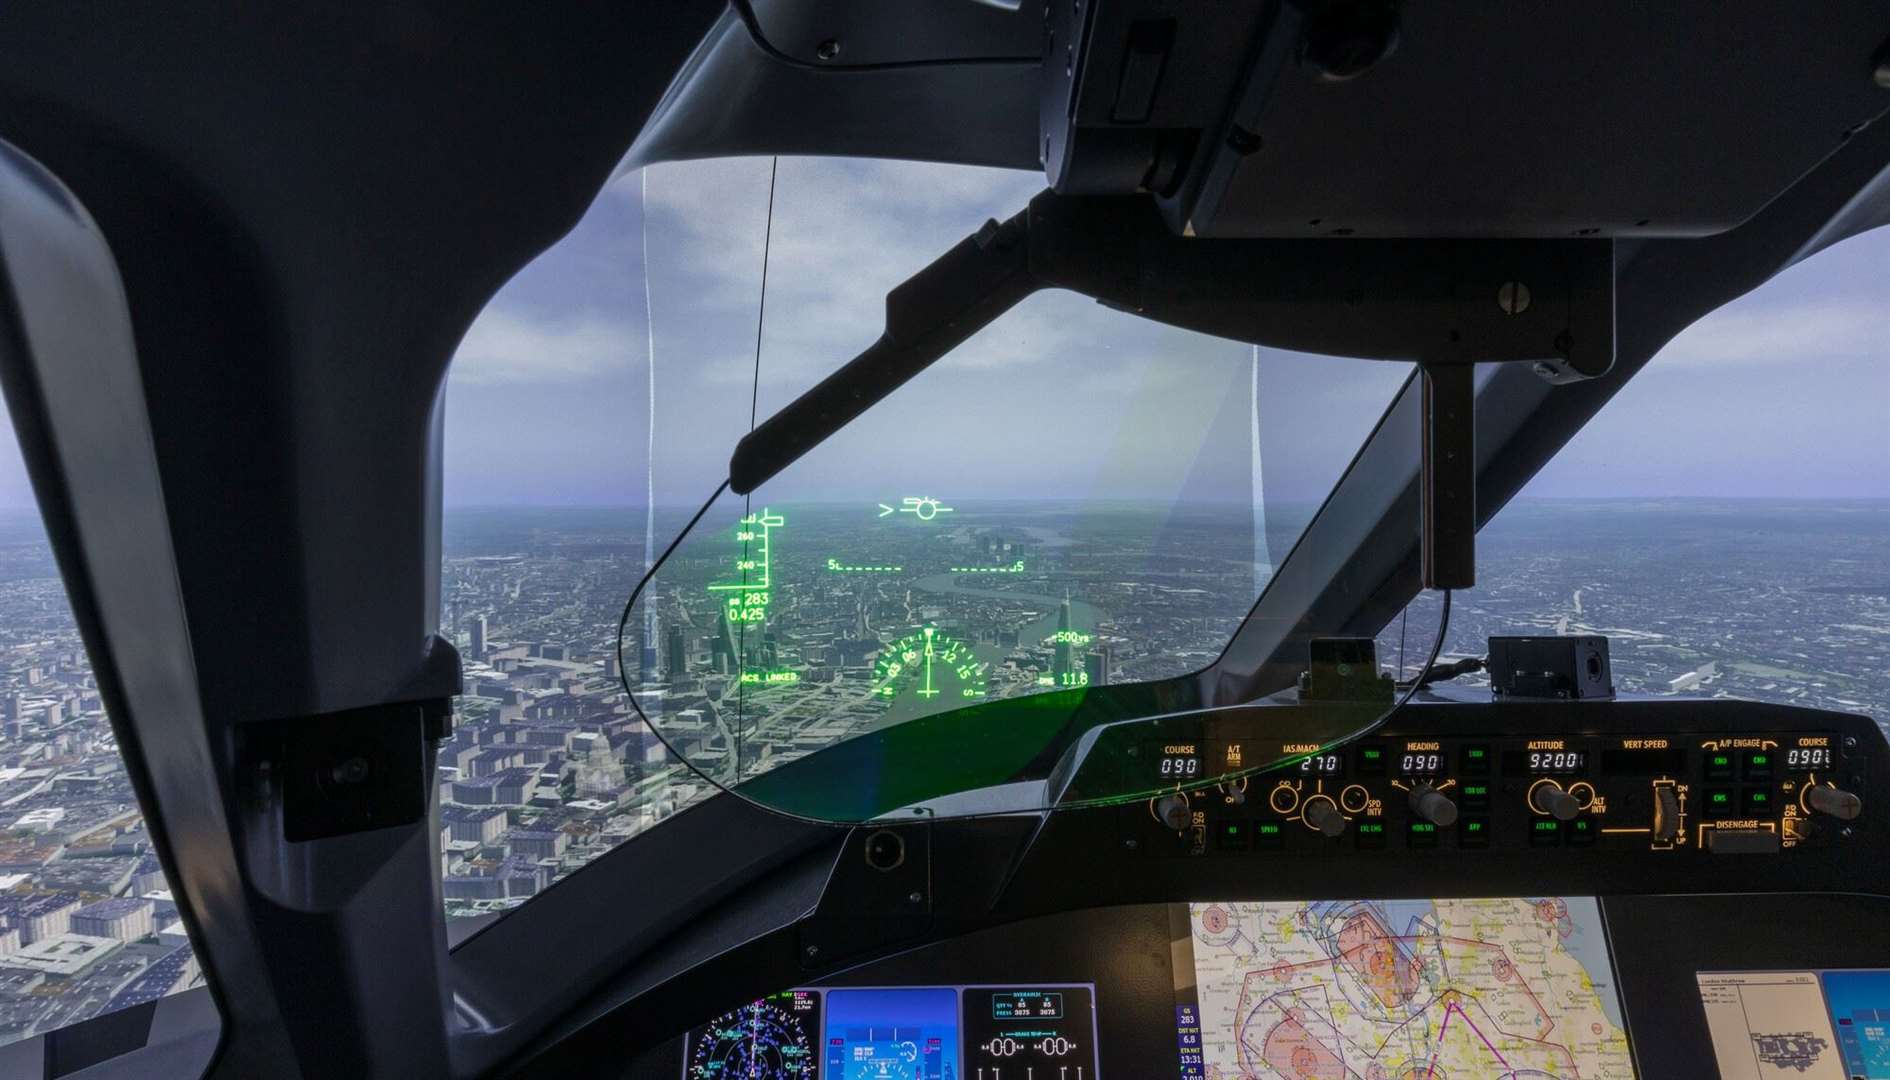 The Litewave ® Head-Up Display (HUD), developed at BAE Systems in Rochester. Using the company’s patented optical waveguide technology, the HUD comprises of a high-resolution, fully digital display that can be integrated into cockpits with limited space.